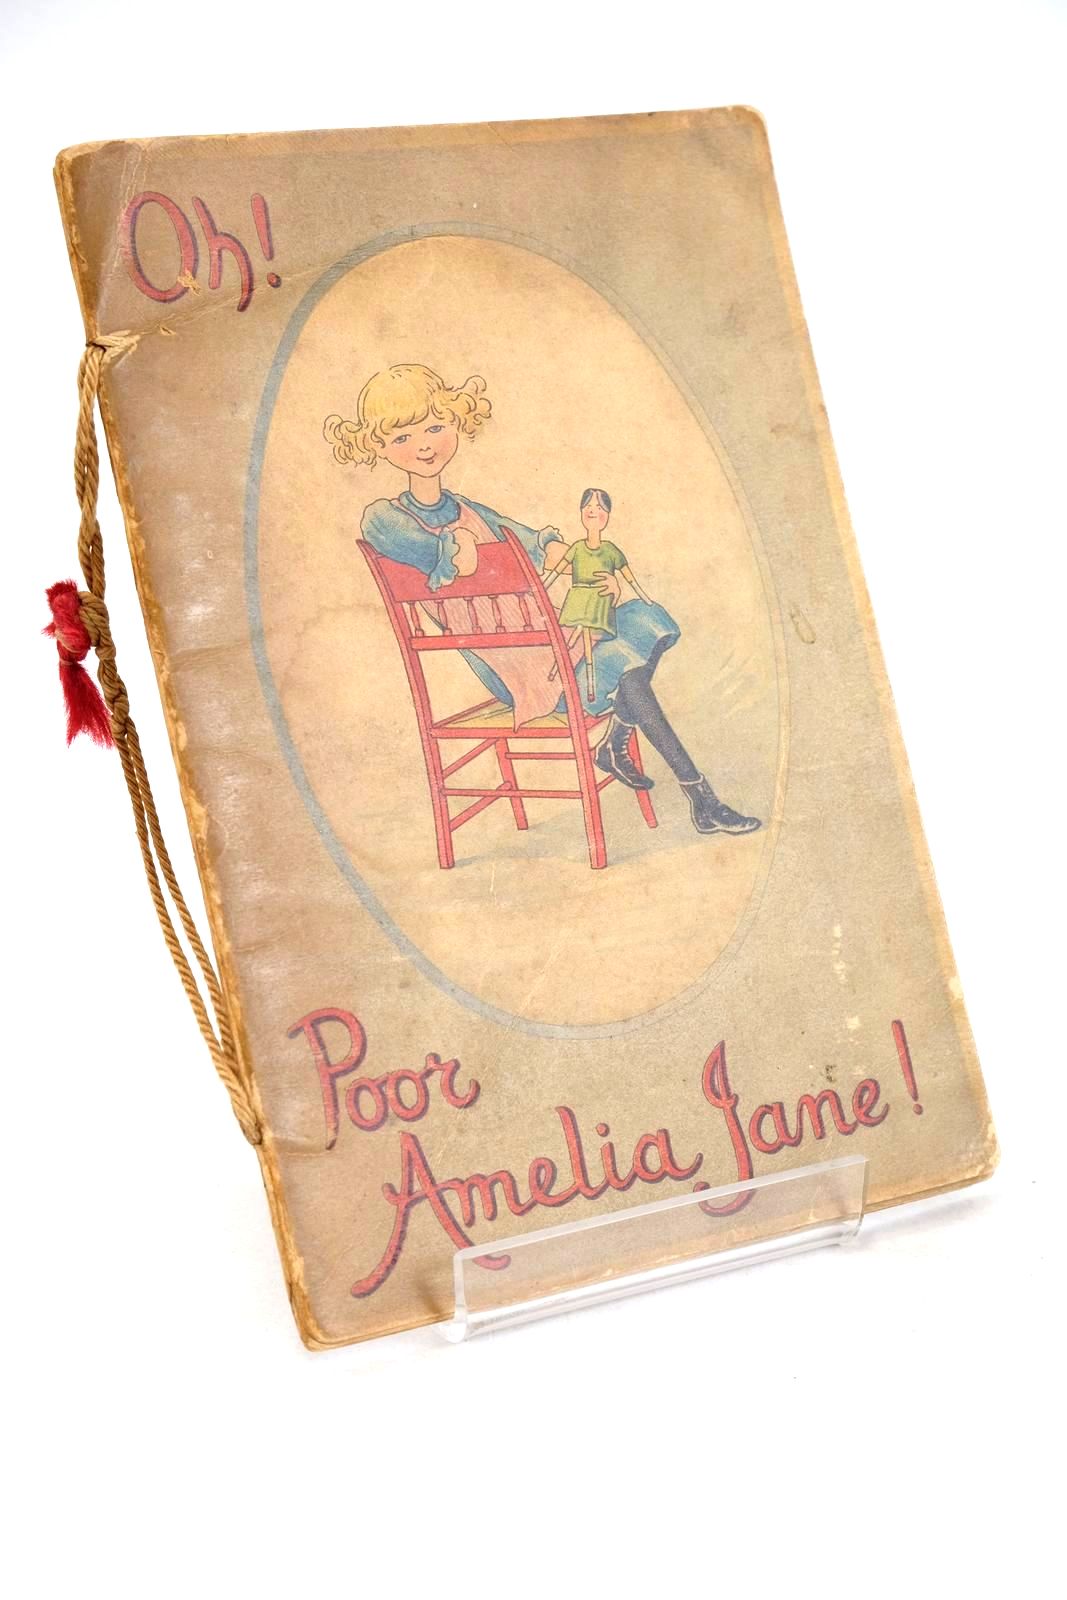 Photo of OH! POOR AMELIA JANE! written by Ainslie, Kathleen illustrated by Ainslie, Kathleen published by Castell Brothers Ltd. (STOCK CODE: 1326293)  for sale by Stella & Rose's Books